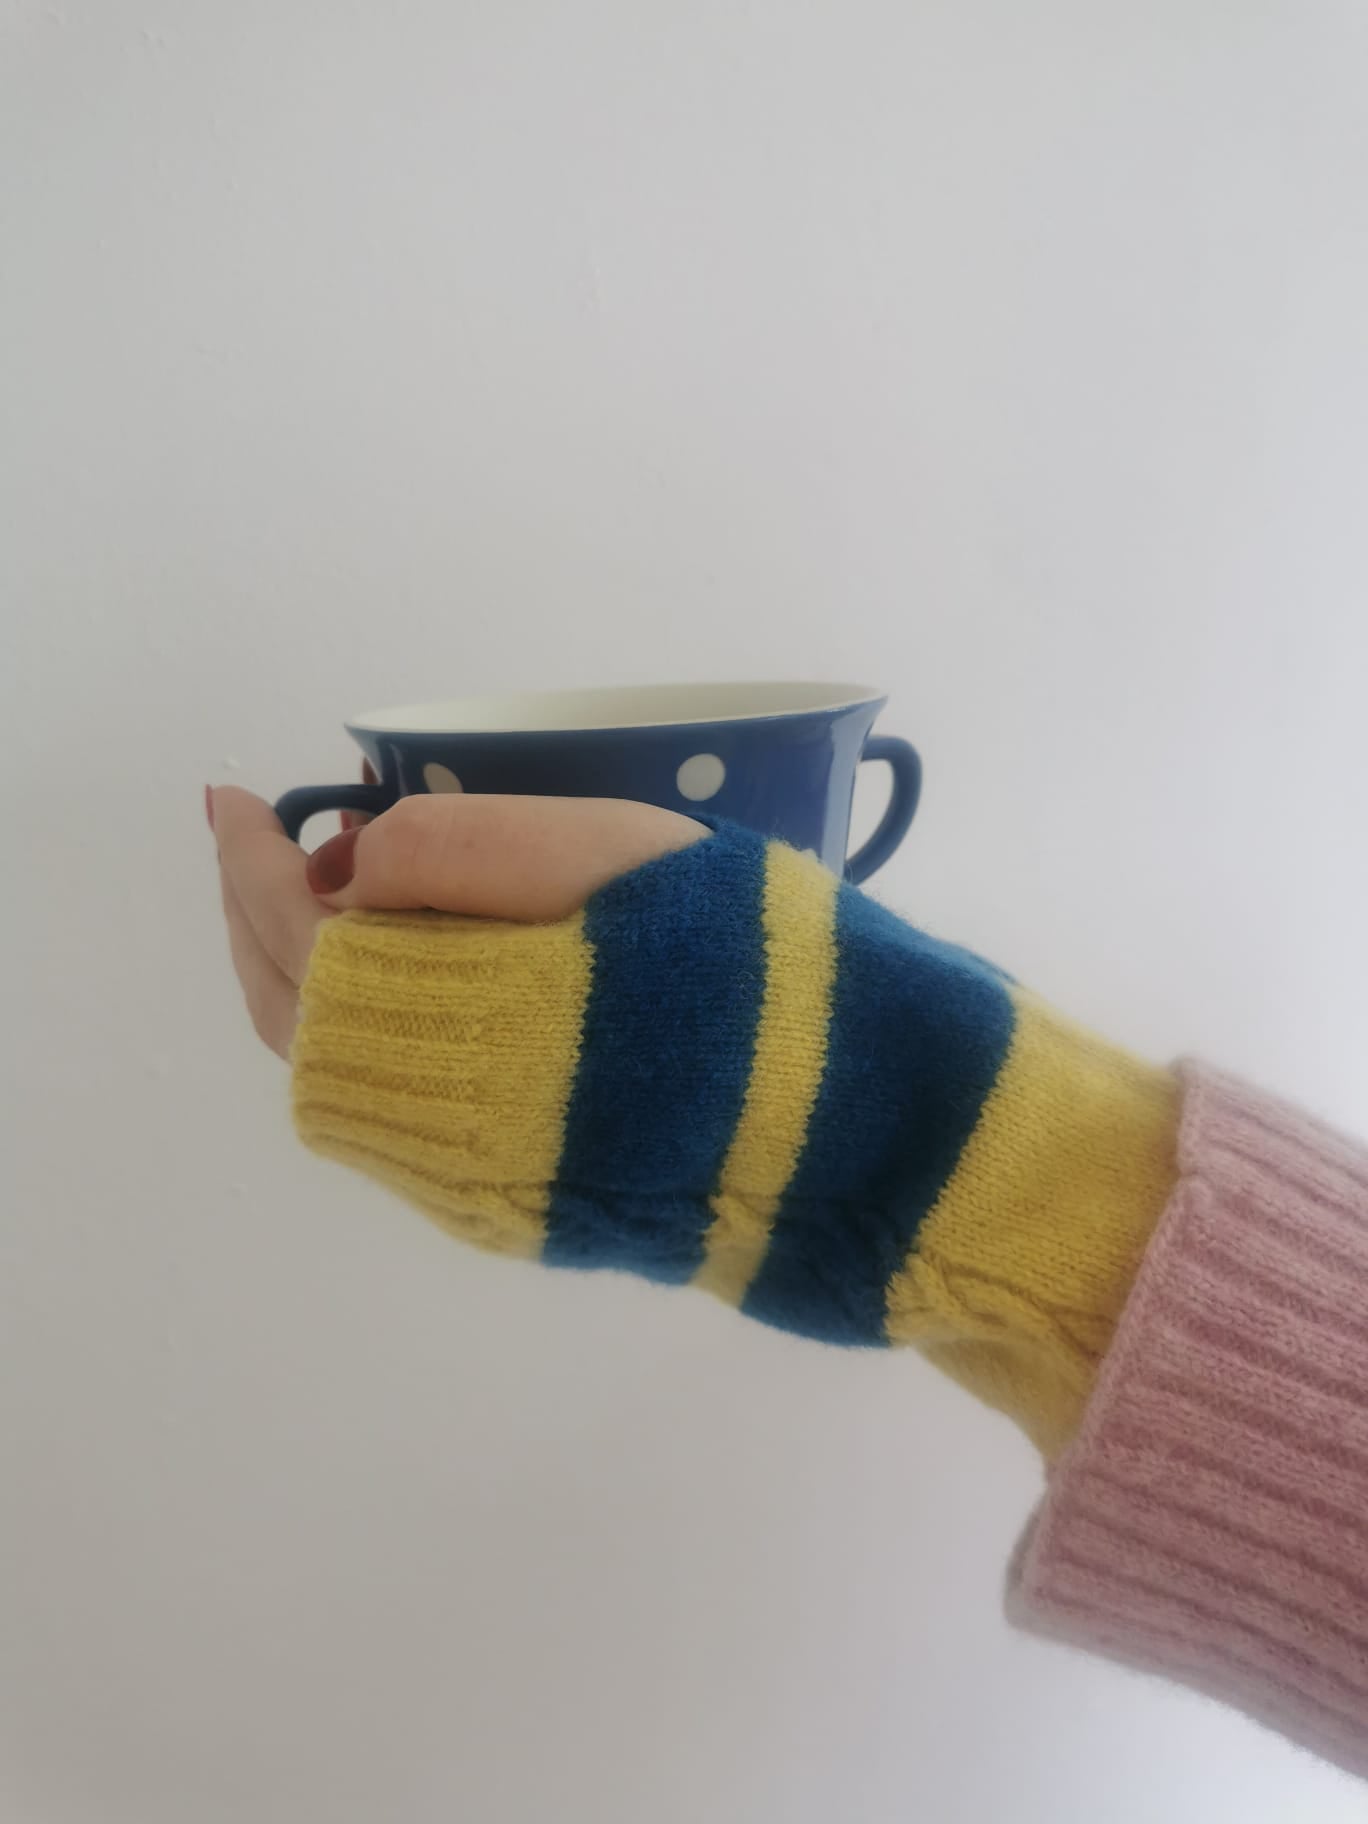 Muddle Bus 03 Pied Piper Fingerless Gloves. Hands wearing yellow and blue striped knitted fingerless gloves holding blue cup with white spots in front of white wall.